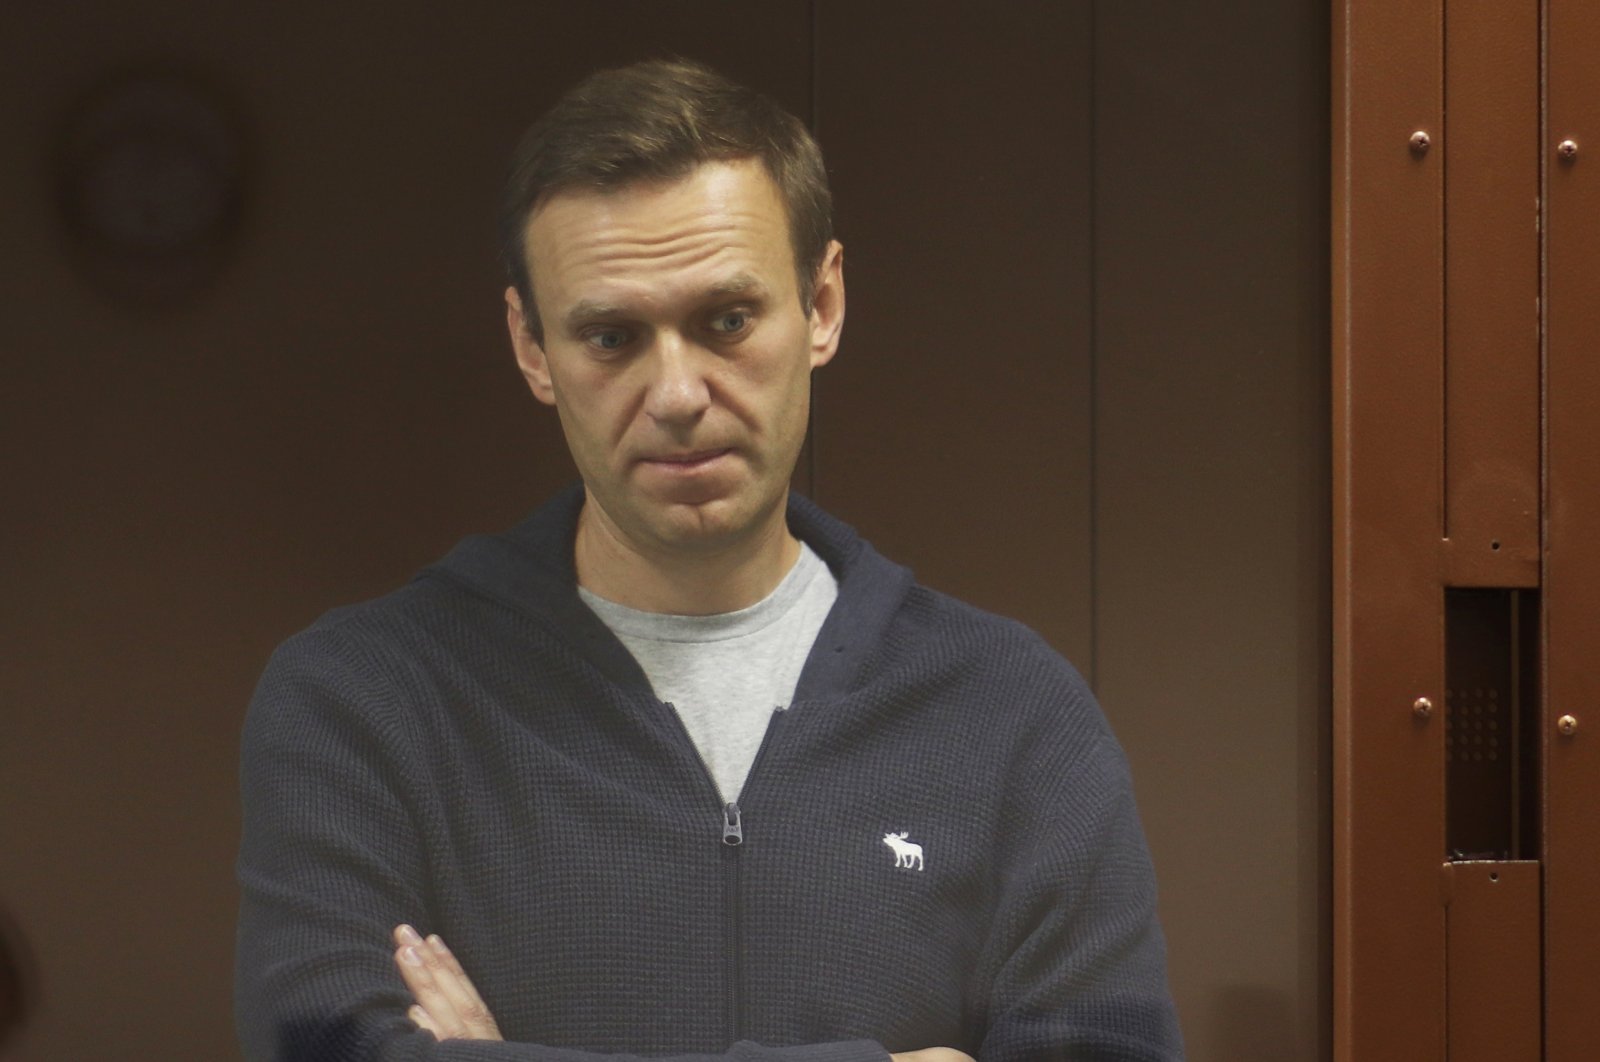 Kremlin critic Alexei Navalny stands inside a defendant dock during a court hearing in Moscow, Russia, Feb. 12, 2021. (Reuters Photo)